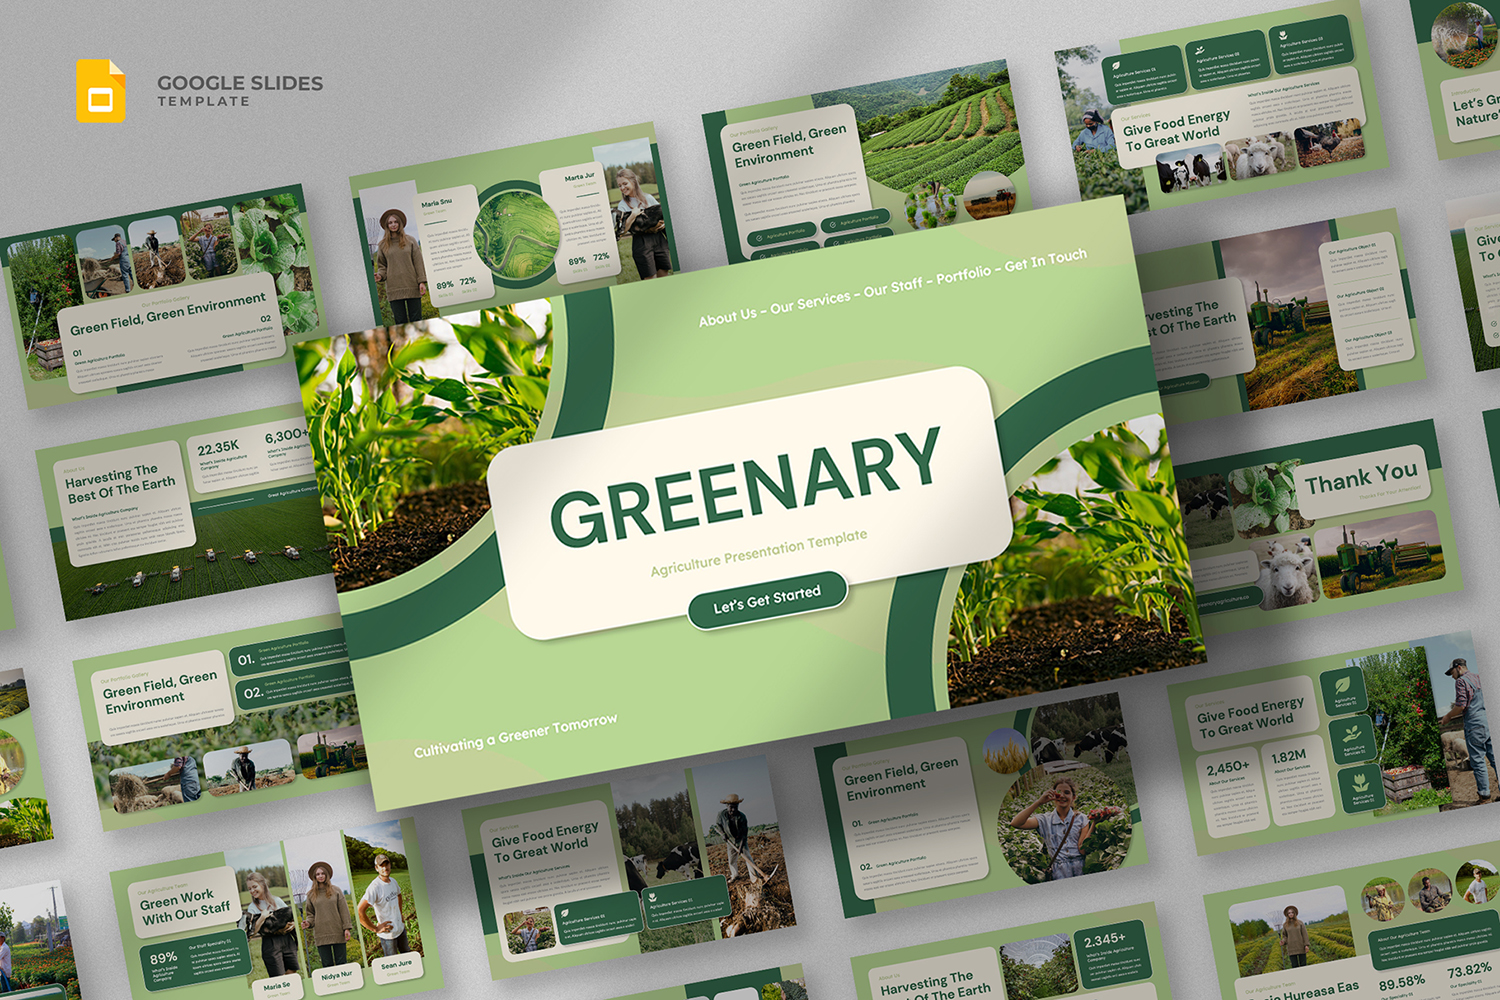 Greenary - Agriculture Google Slides Template